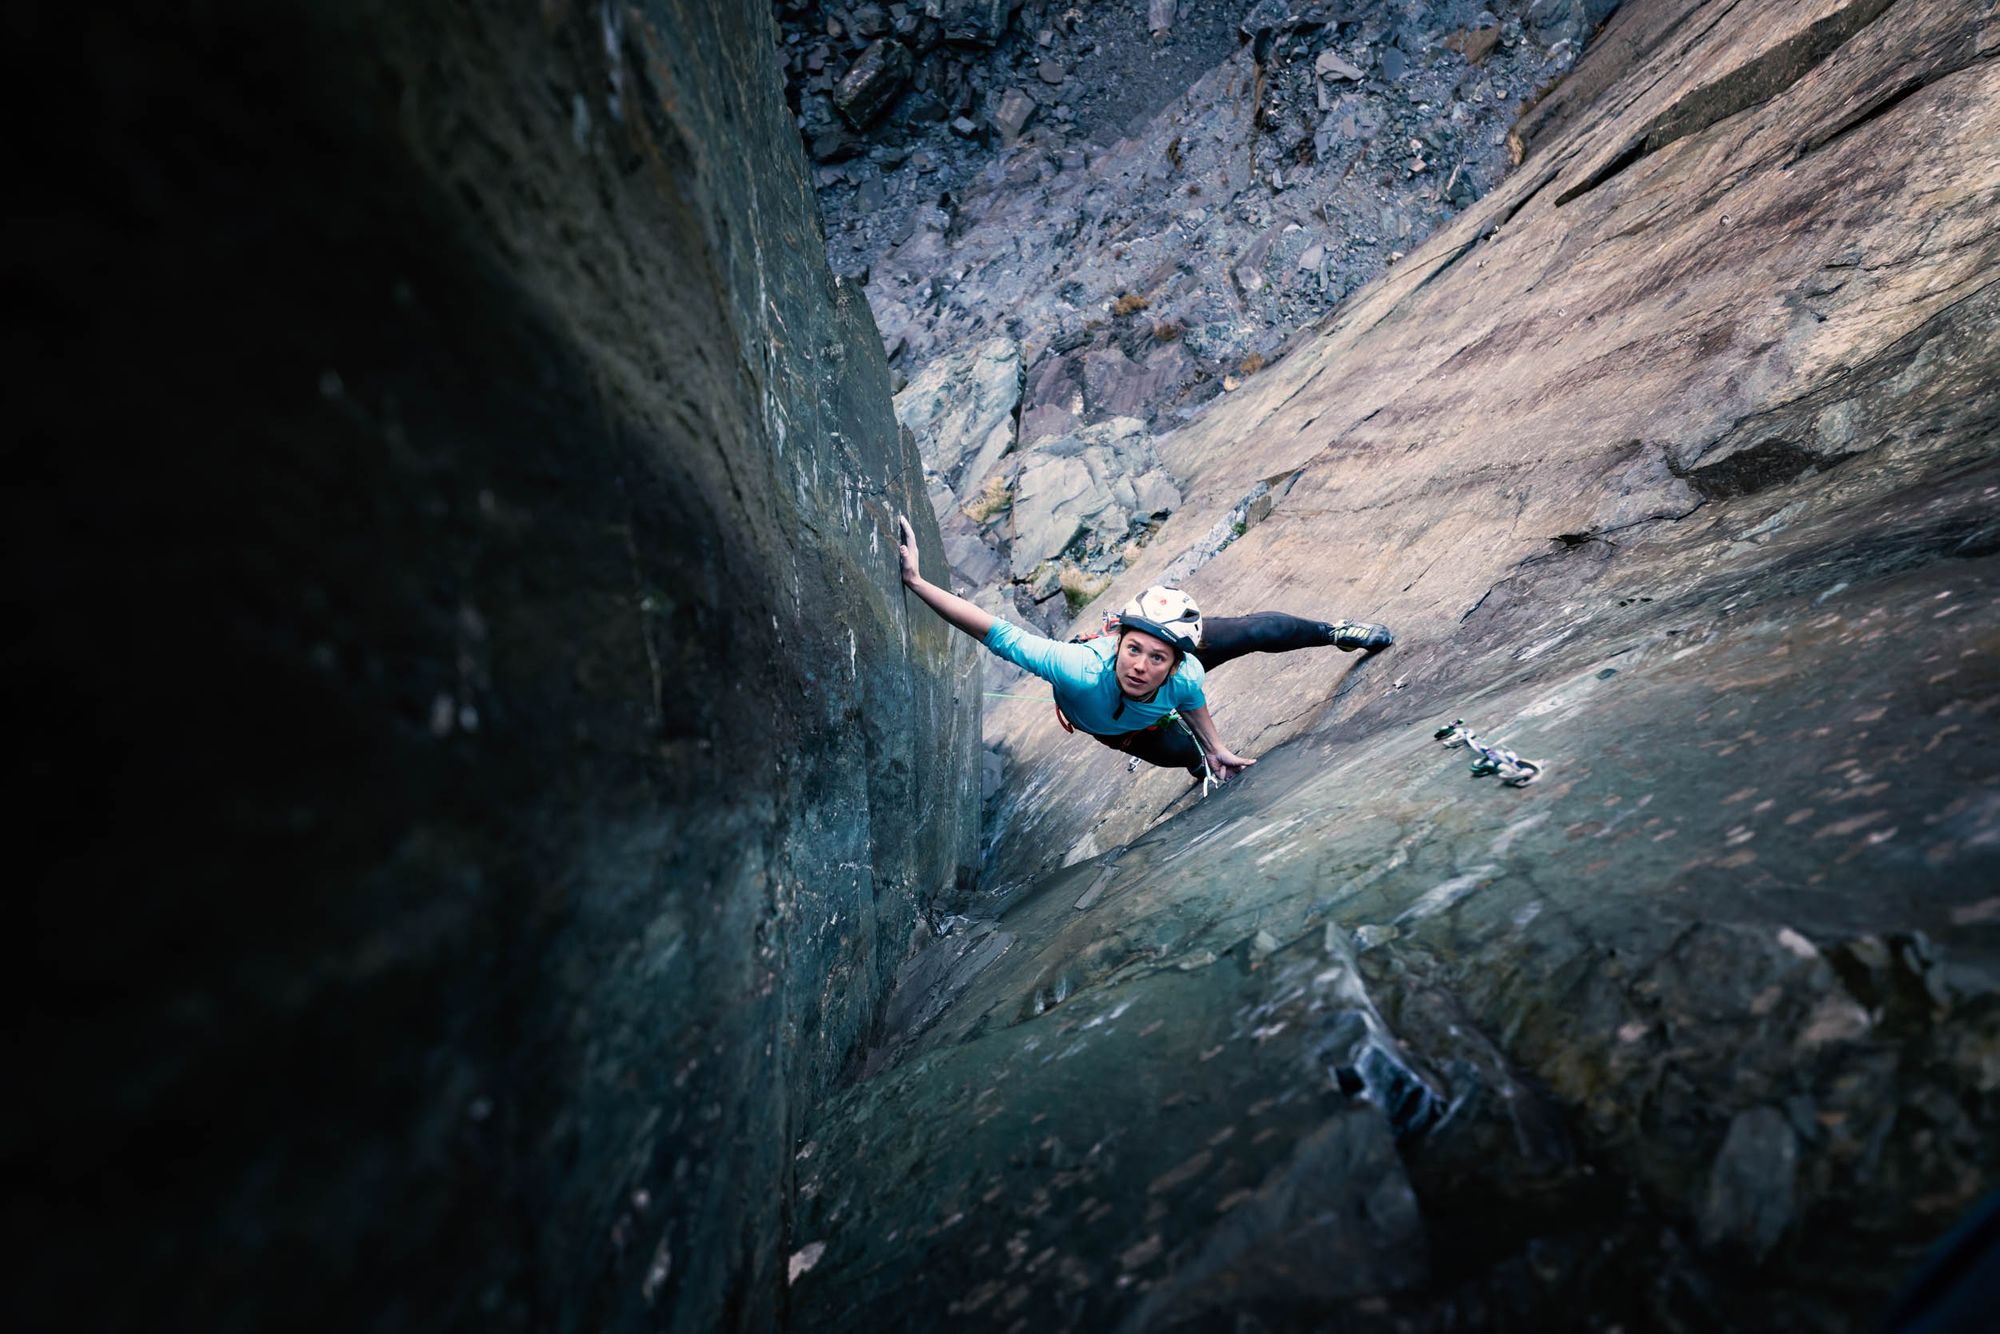 Professional climber Caroline Ciavaldini climbing The Quarryman in North Wales, where she made the first female ascent. 